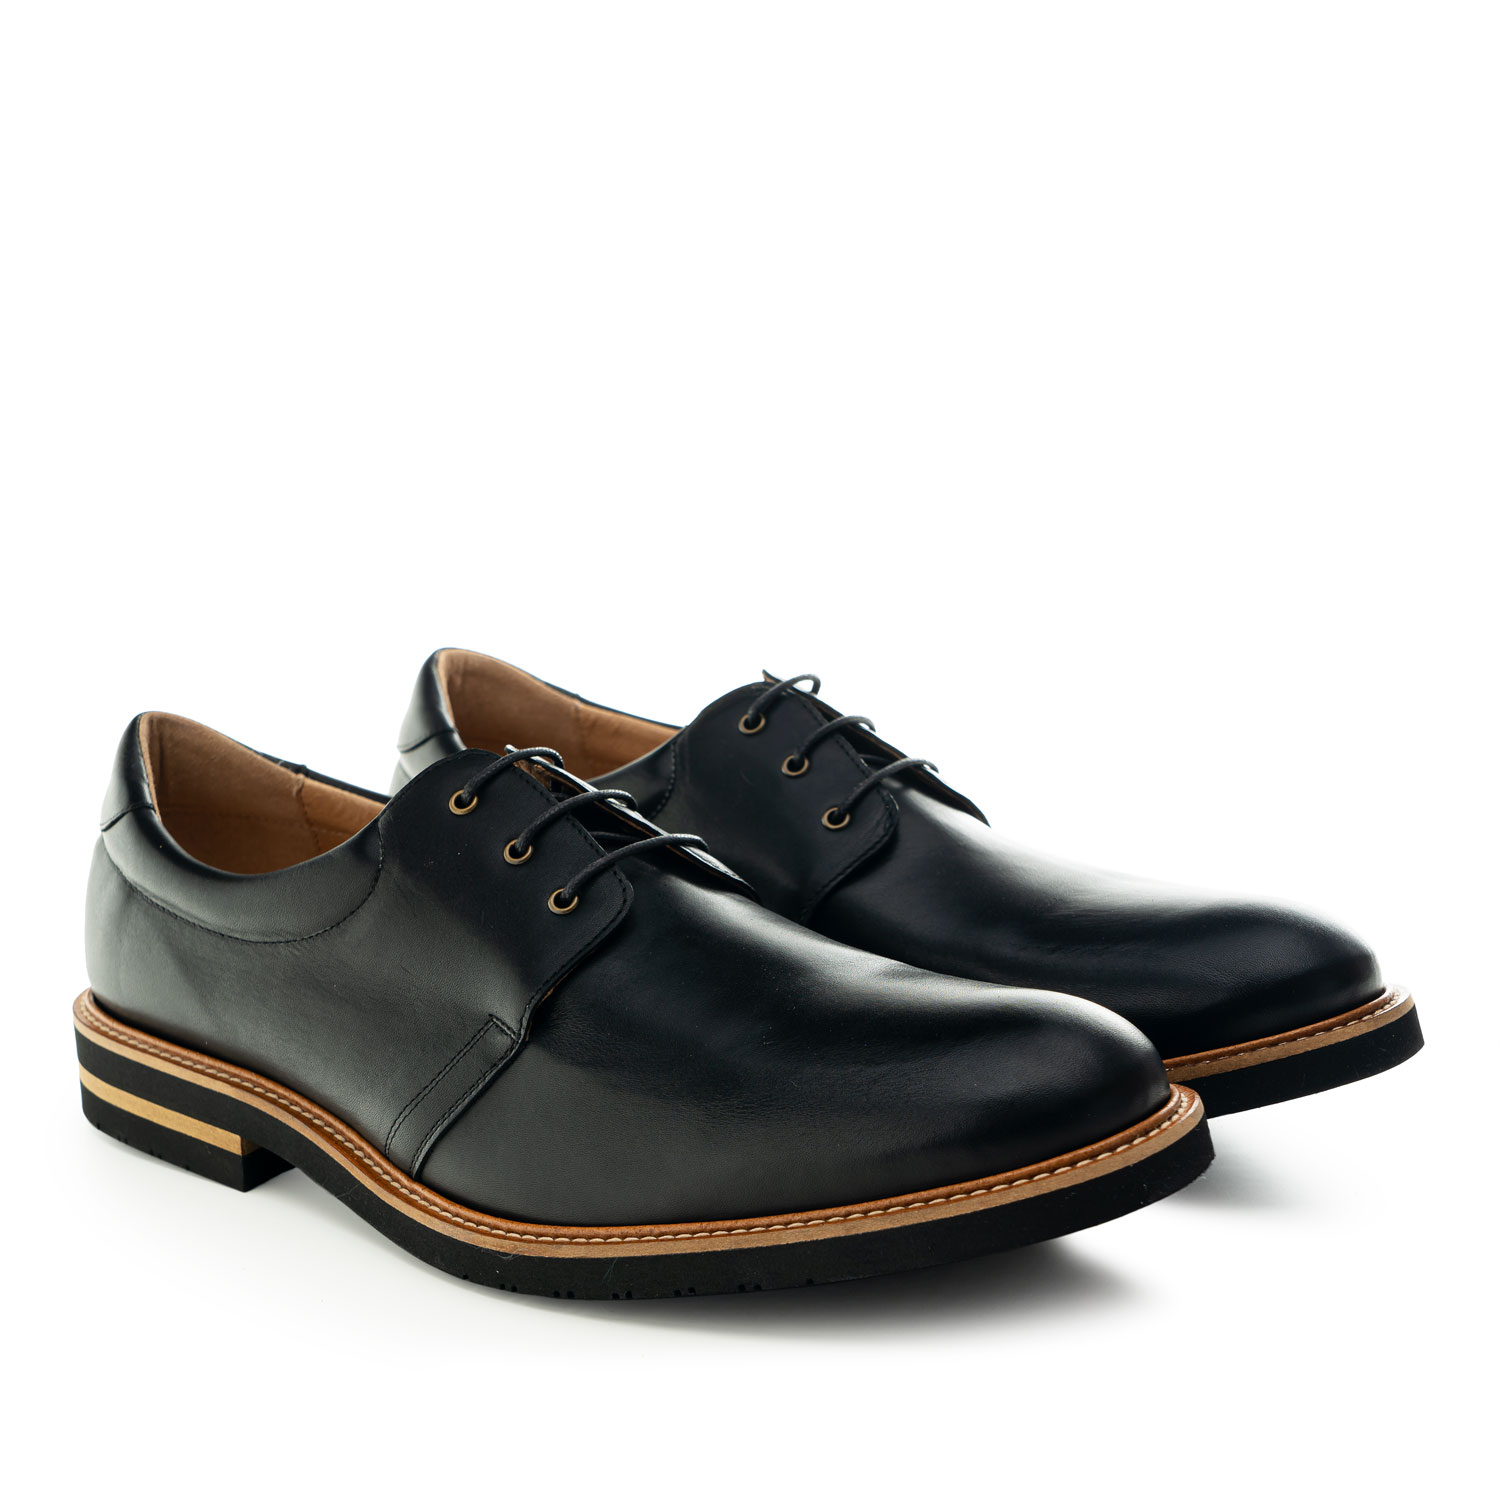 Men's Dress Shoes in Black Leather 